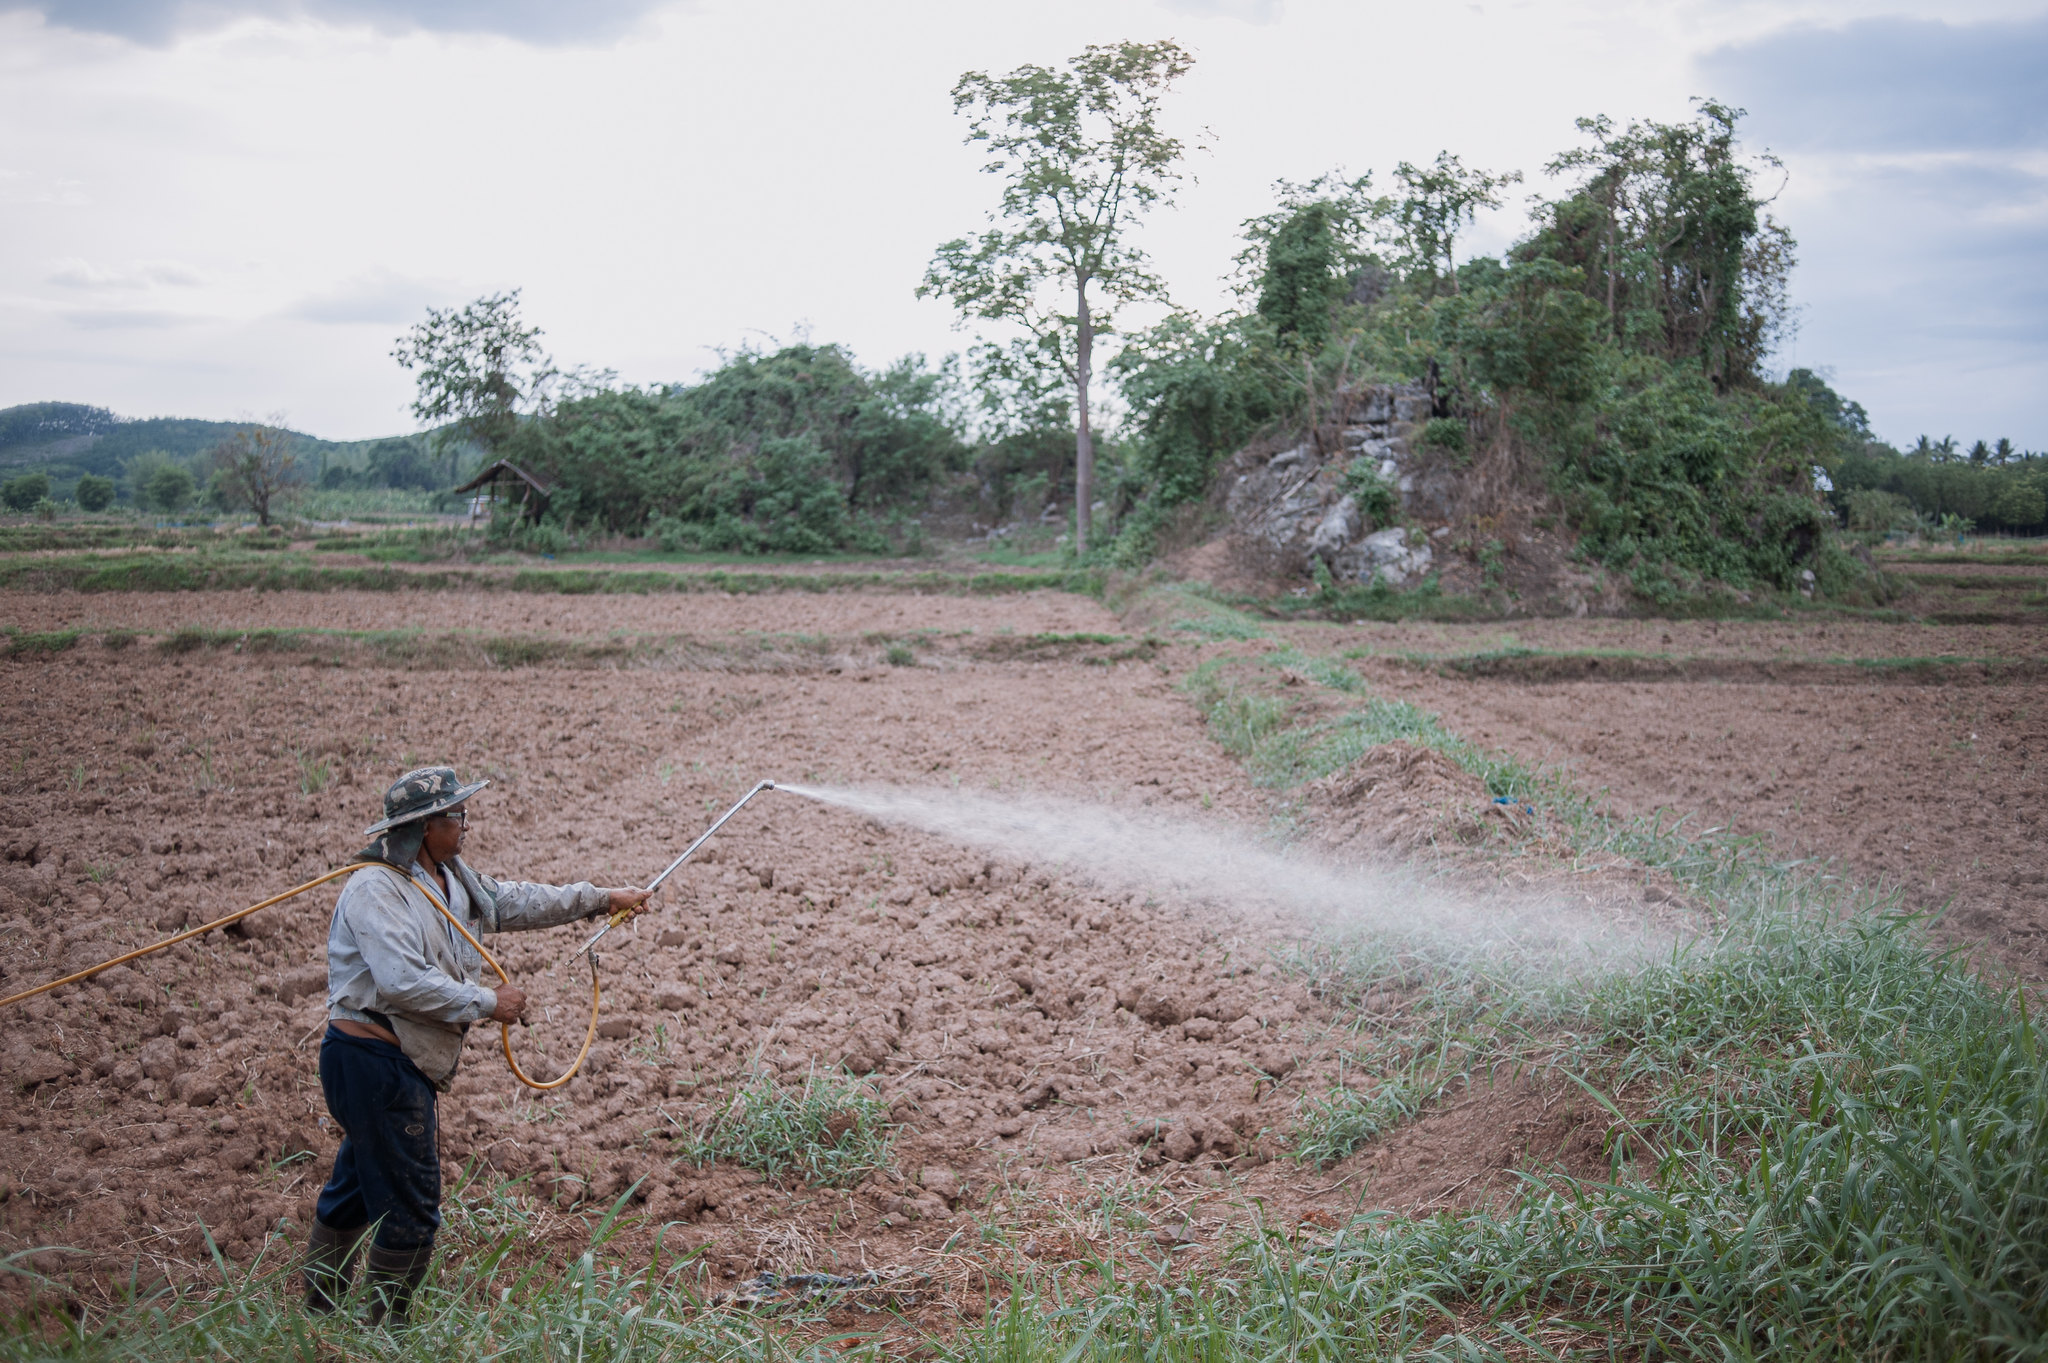 A farm worker spraying water to the land